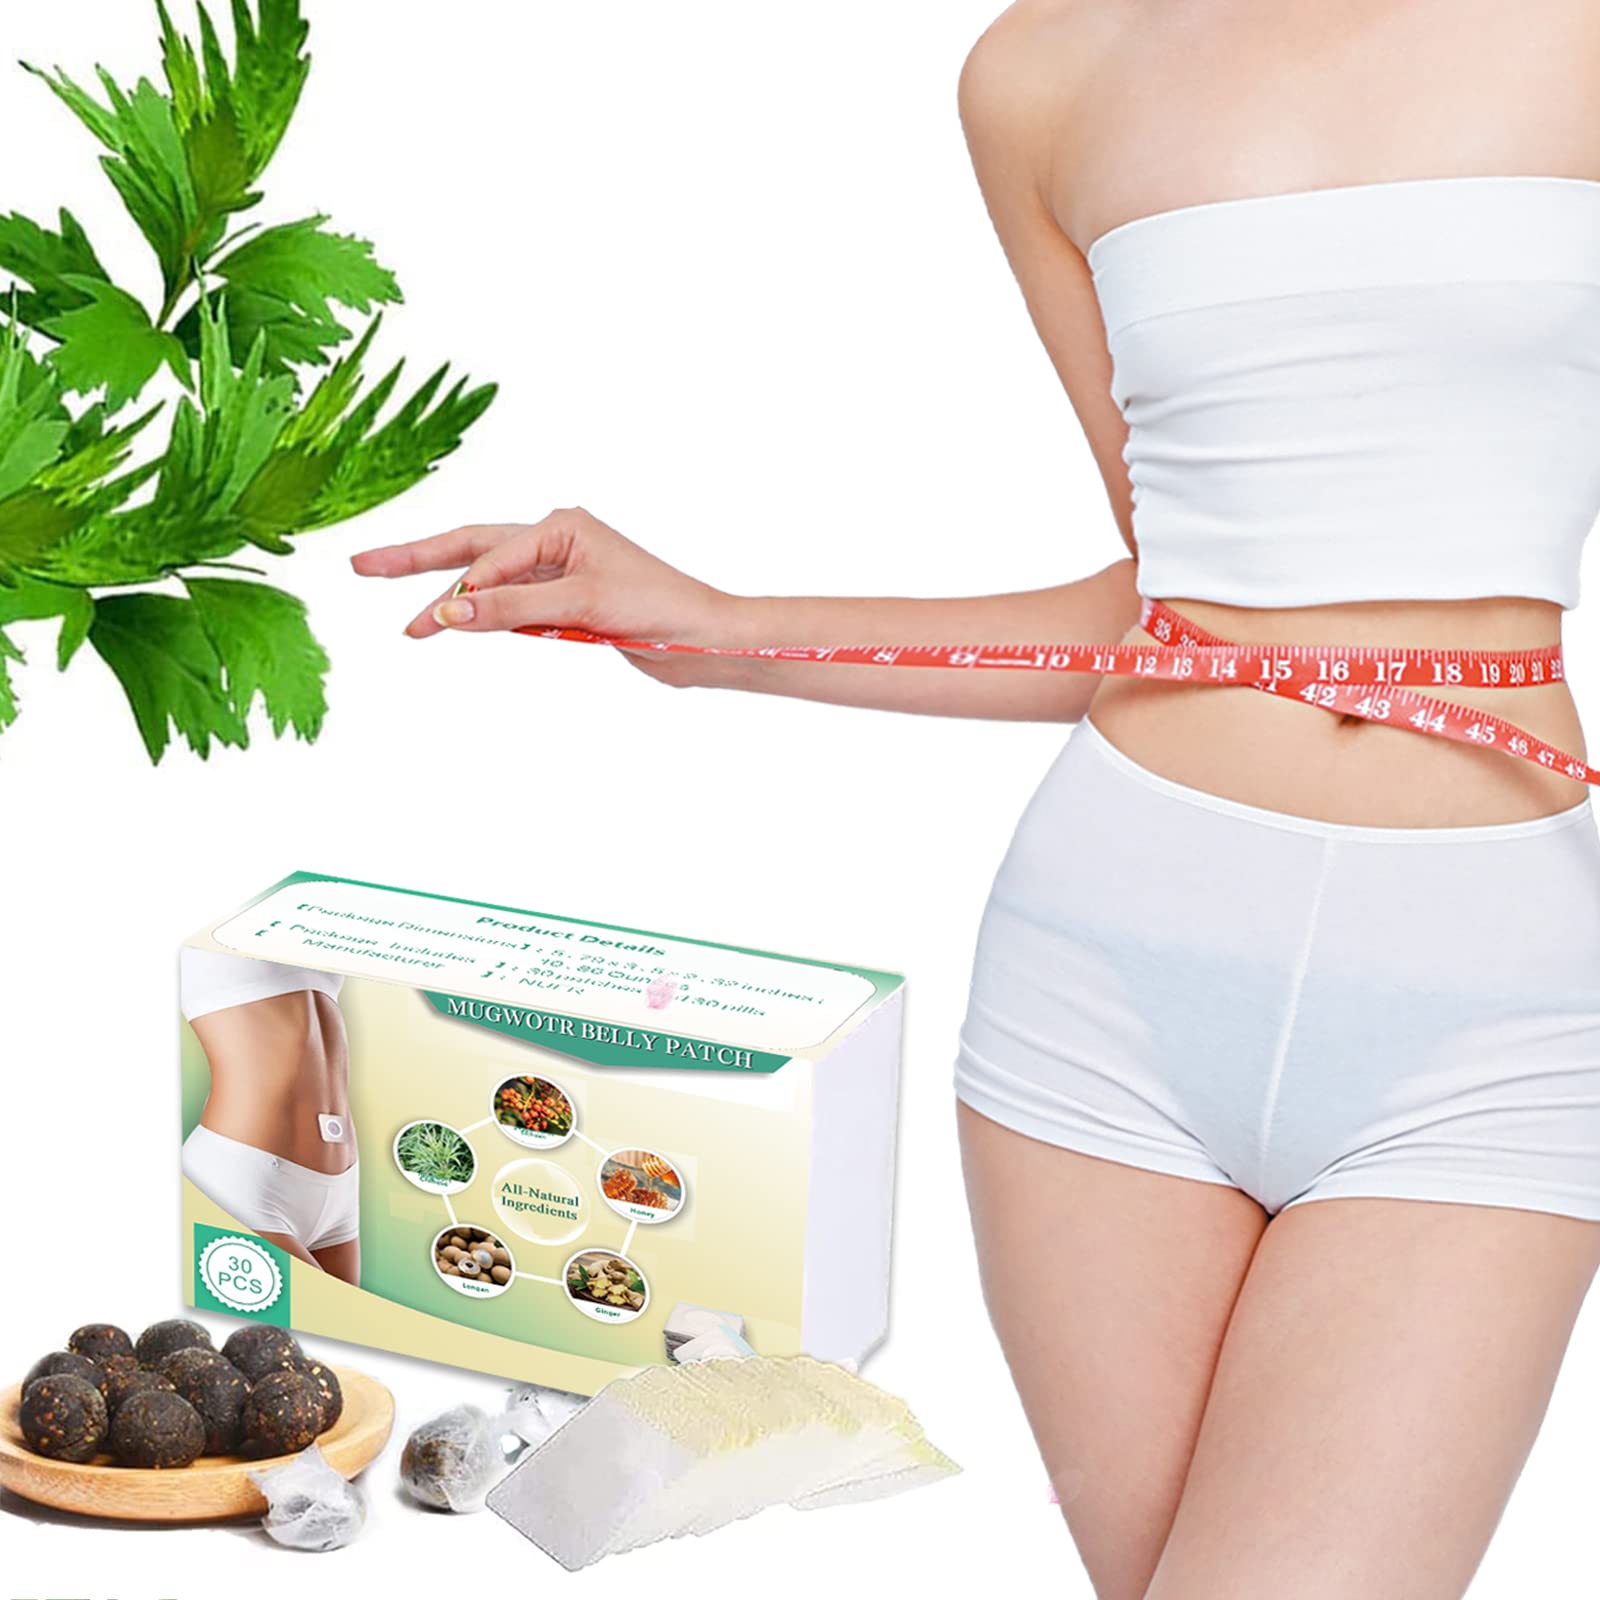 30Pcs Natural Herb Wormwood Essence Pills, Belly Patch Sticker Acupuncture Kit